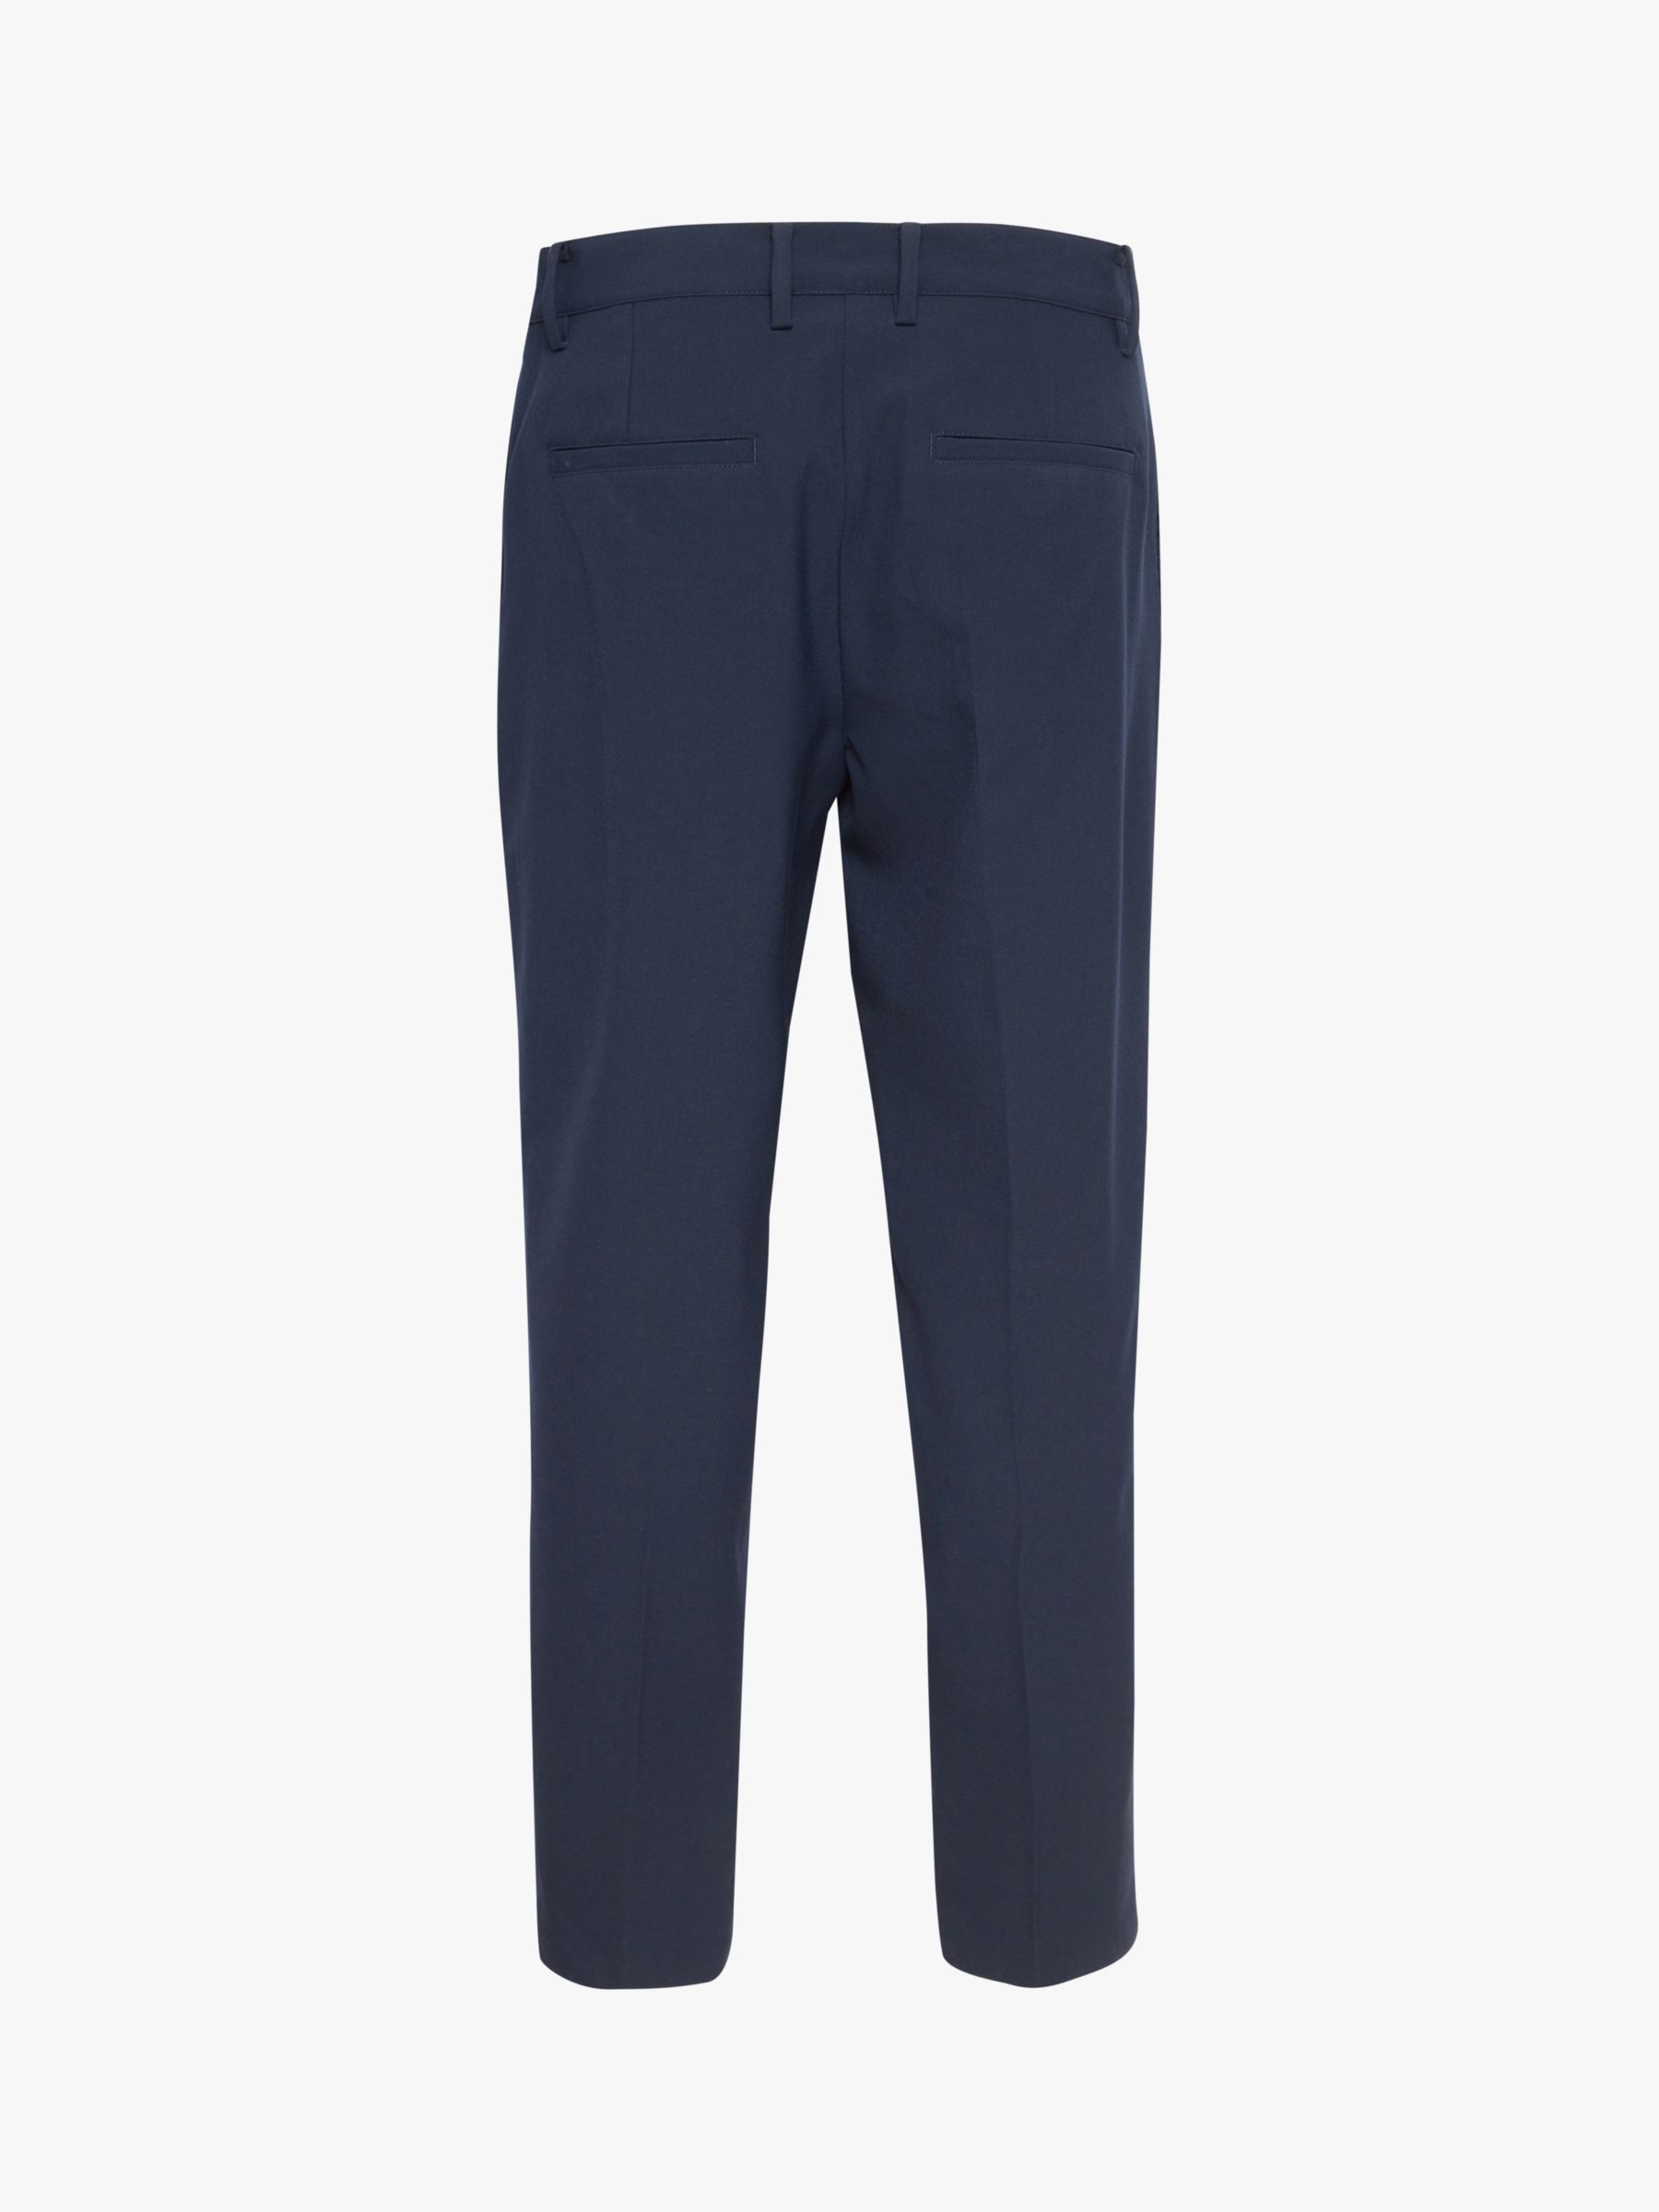 Casual Friday Pepe Stretch Trousers, Dark Navy, 31R